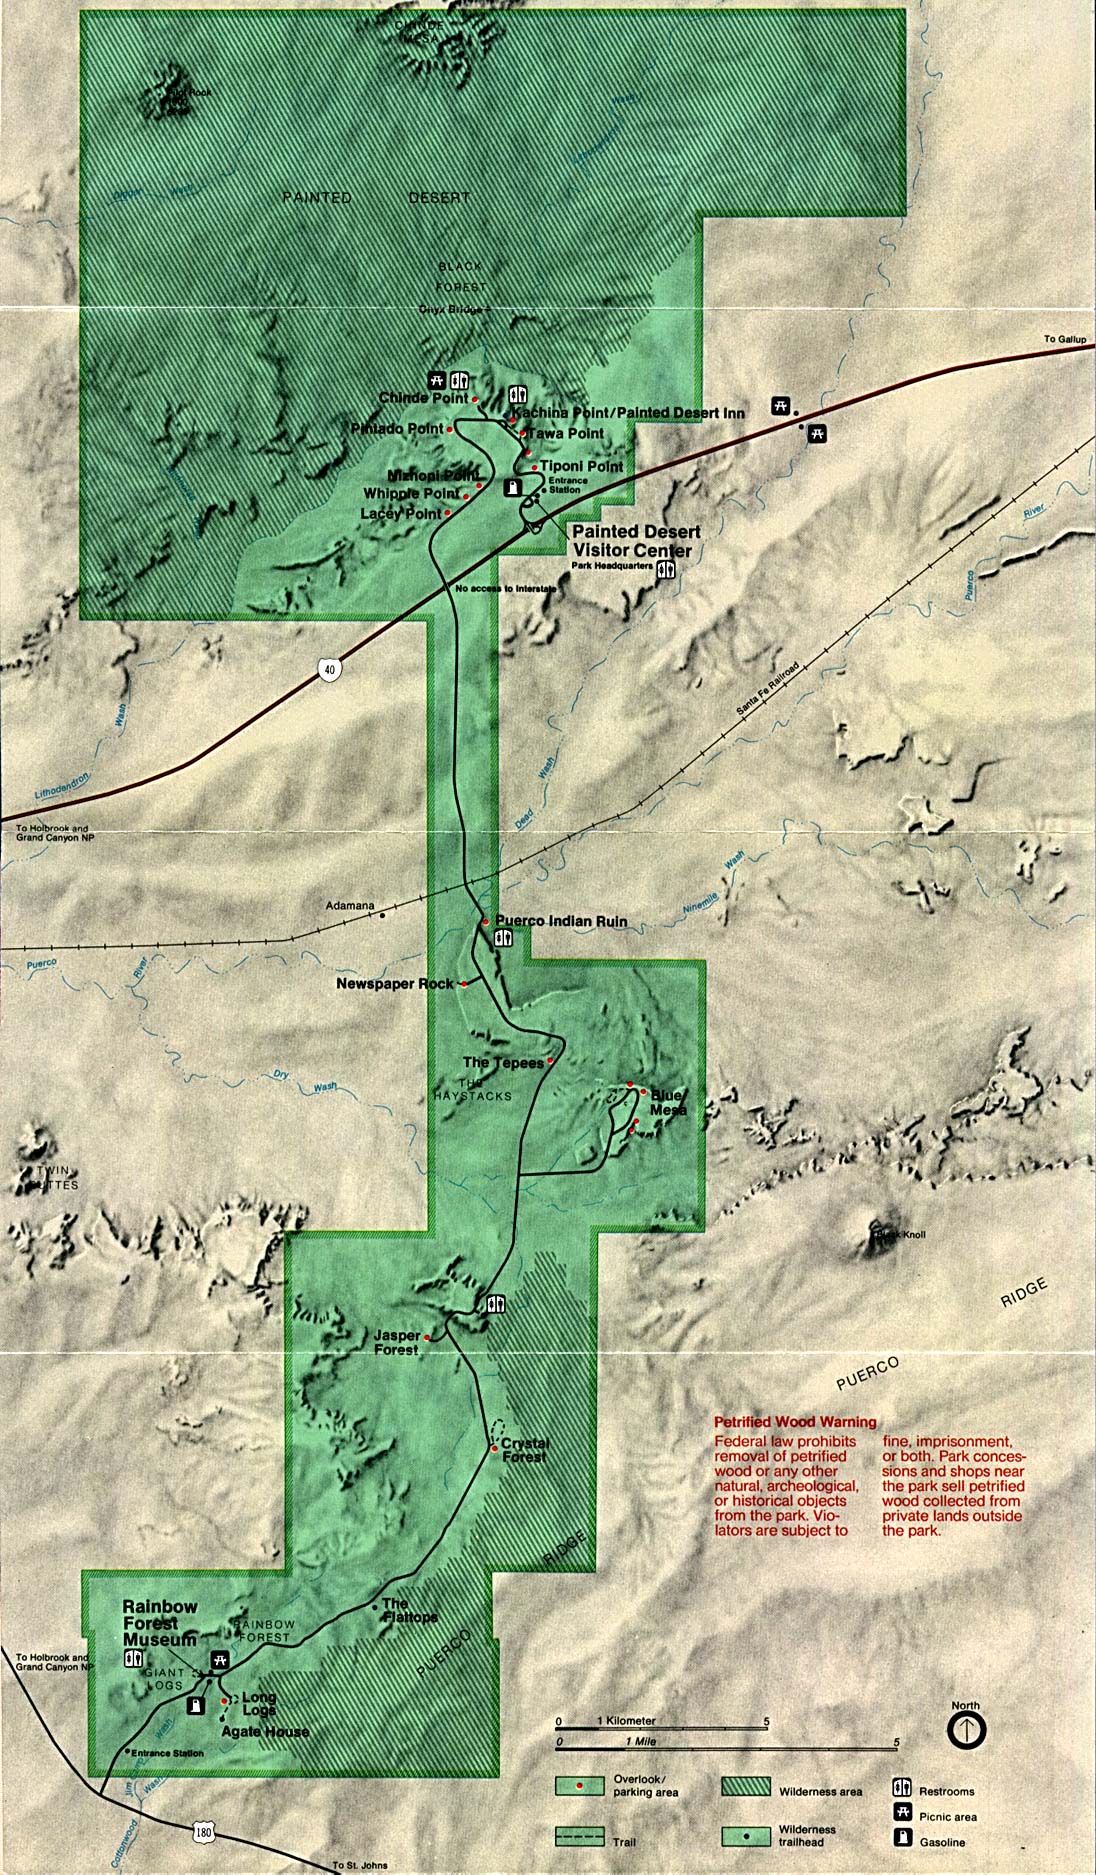  Maps of United States National Parks, Monuments and Historic Sites Petrified Forest National Park [Arizona] (Park Map) (485K) 